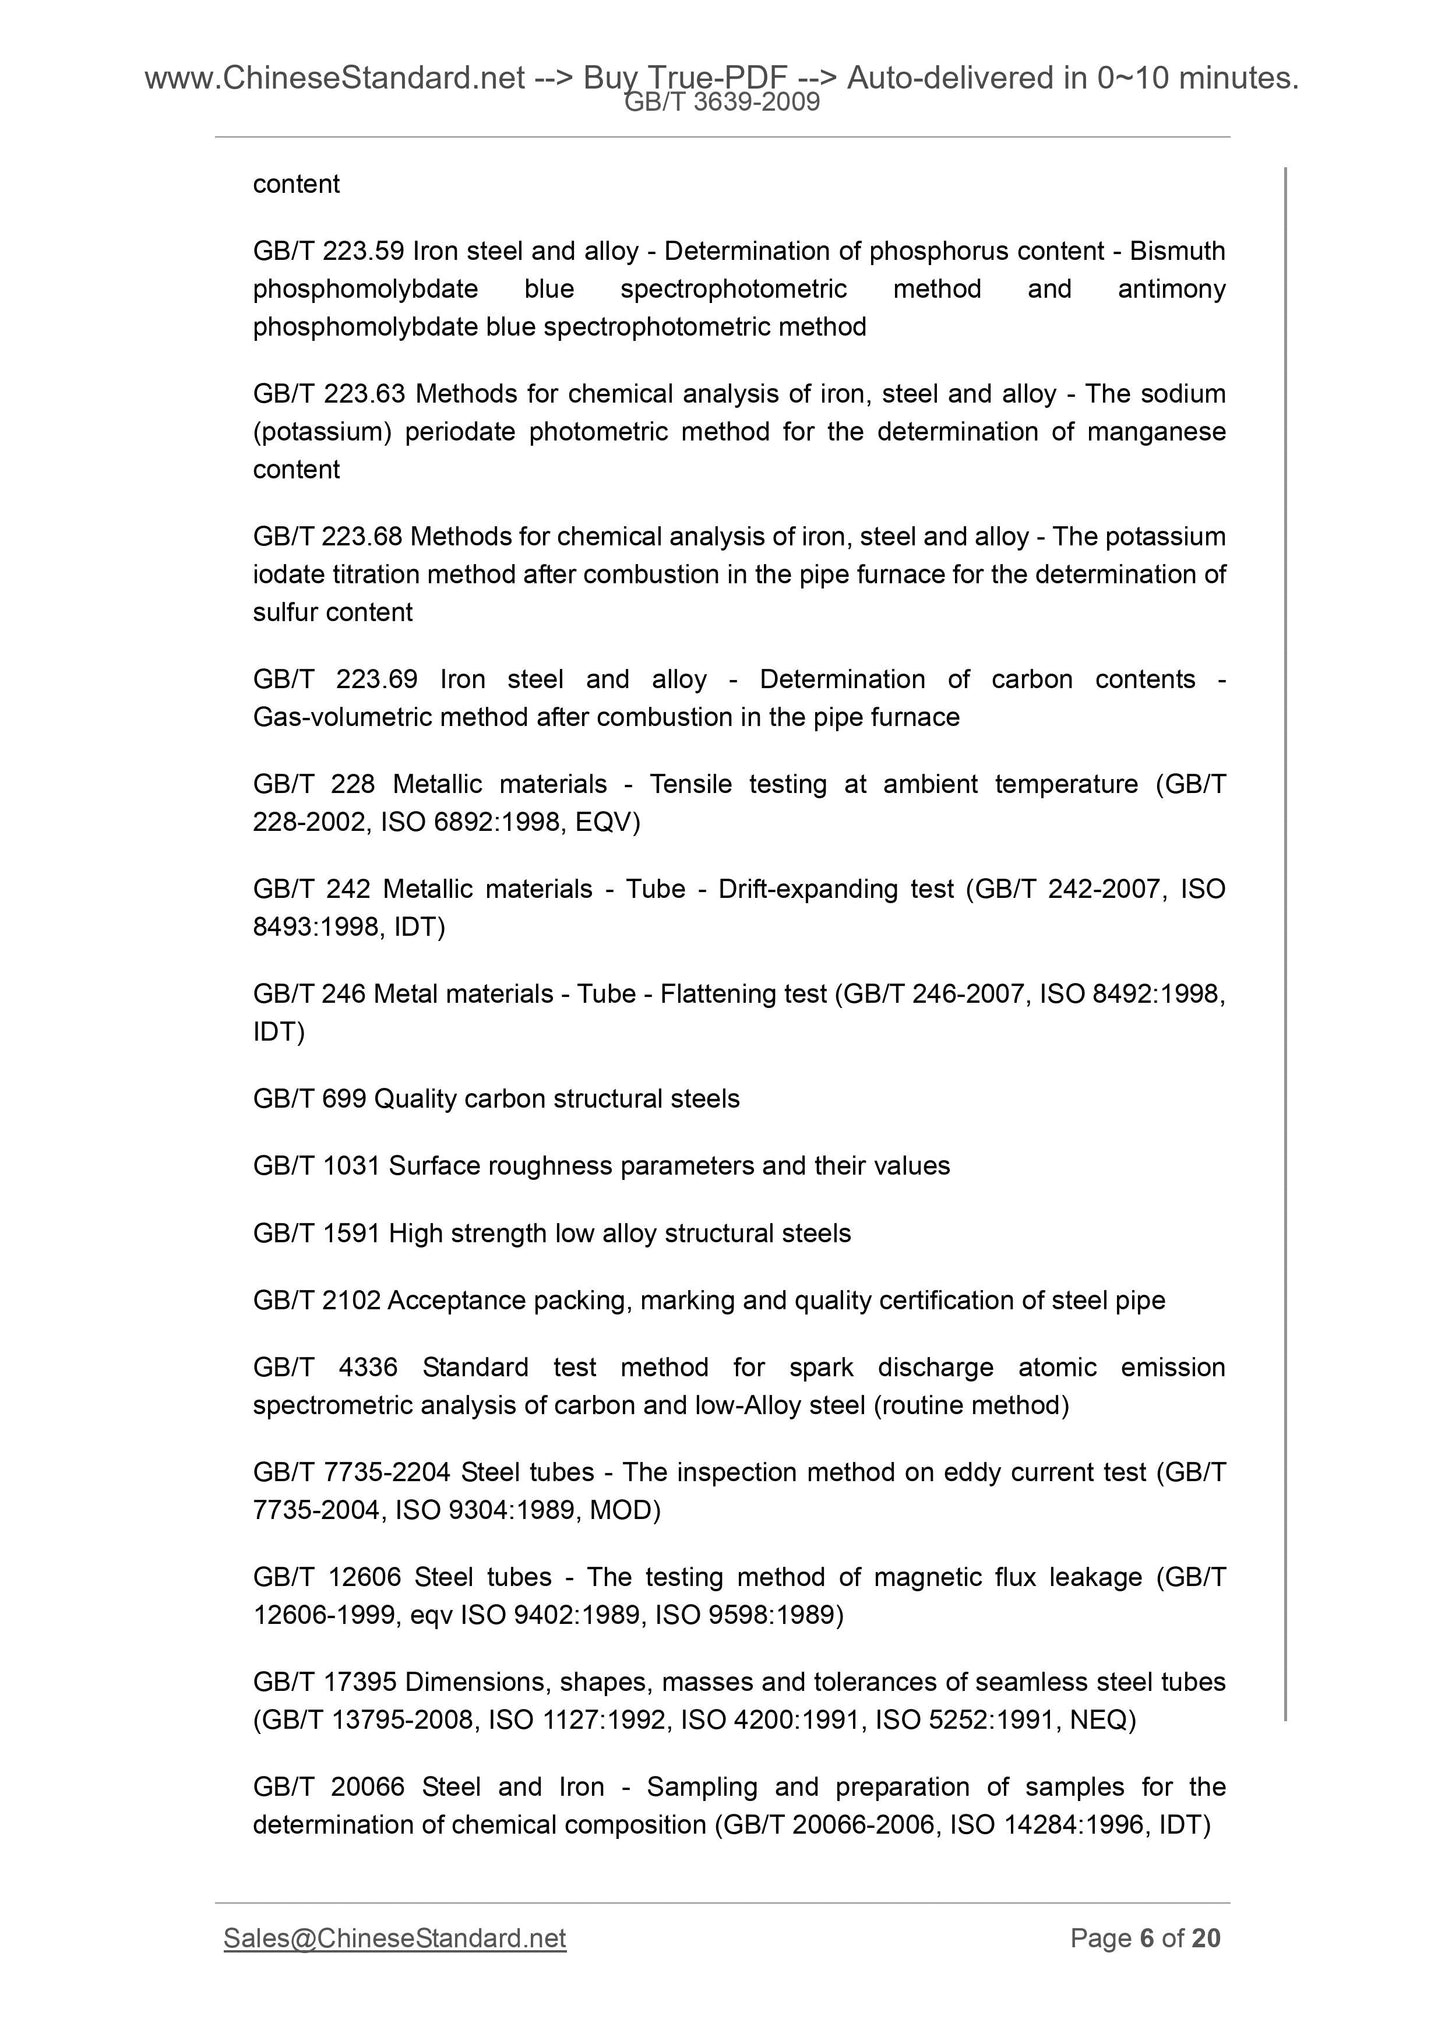 GB/T 3639-2009 Page 6